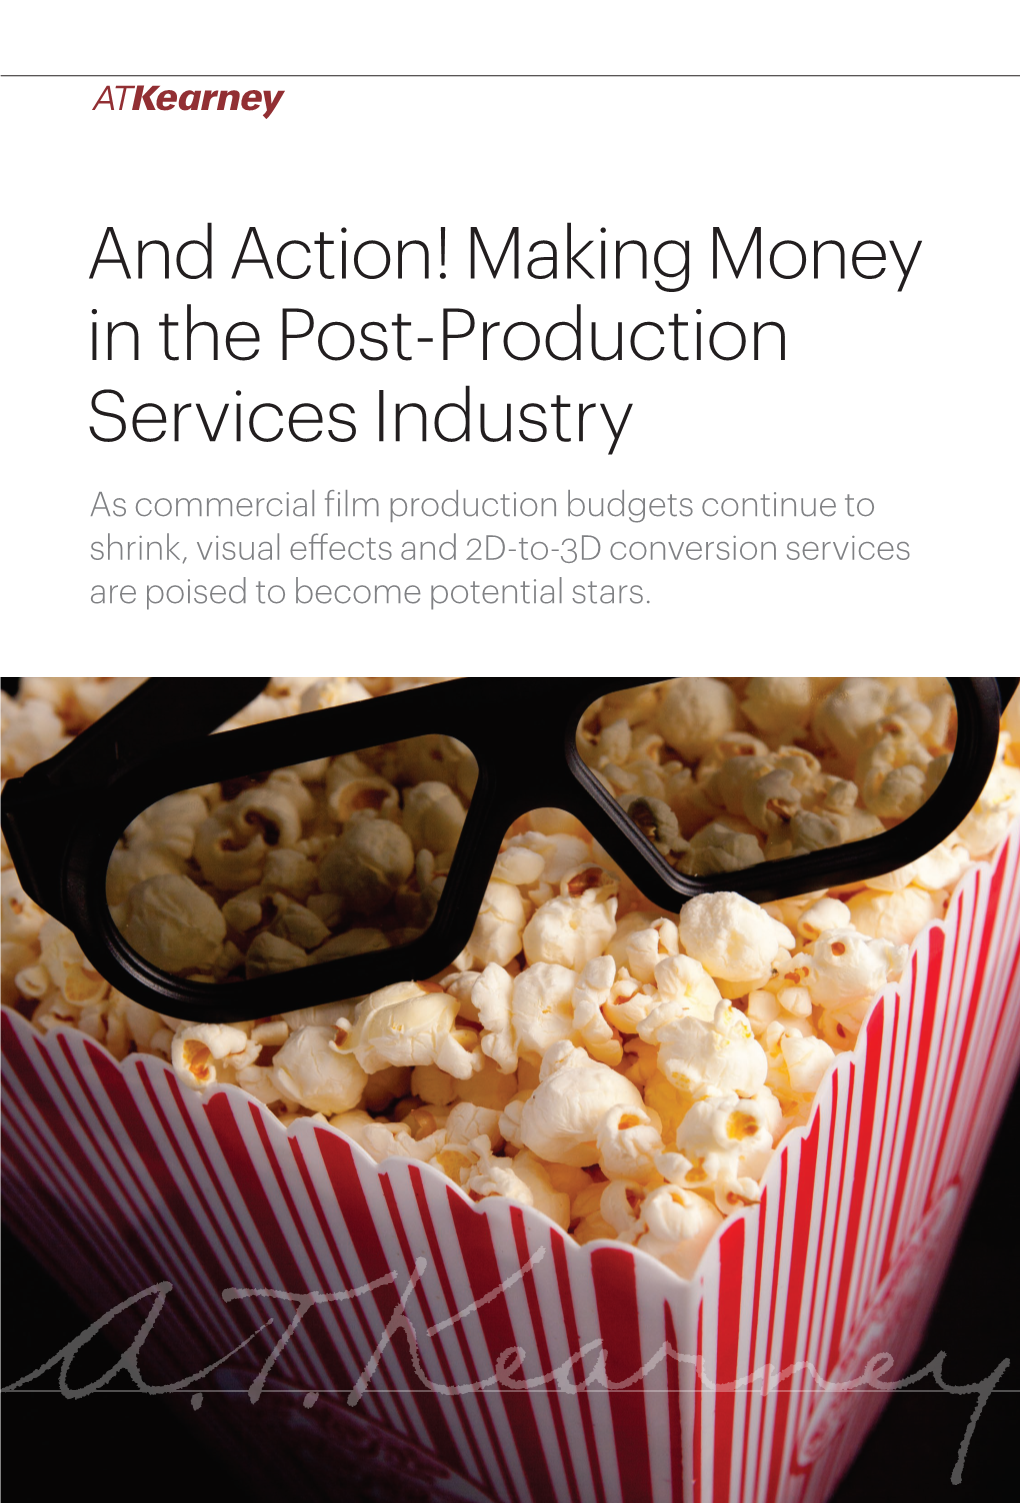 Making Money in the Post-Production Services Industry